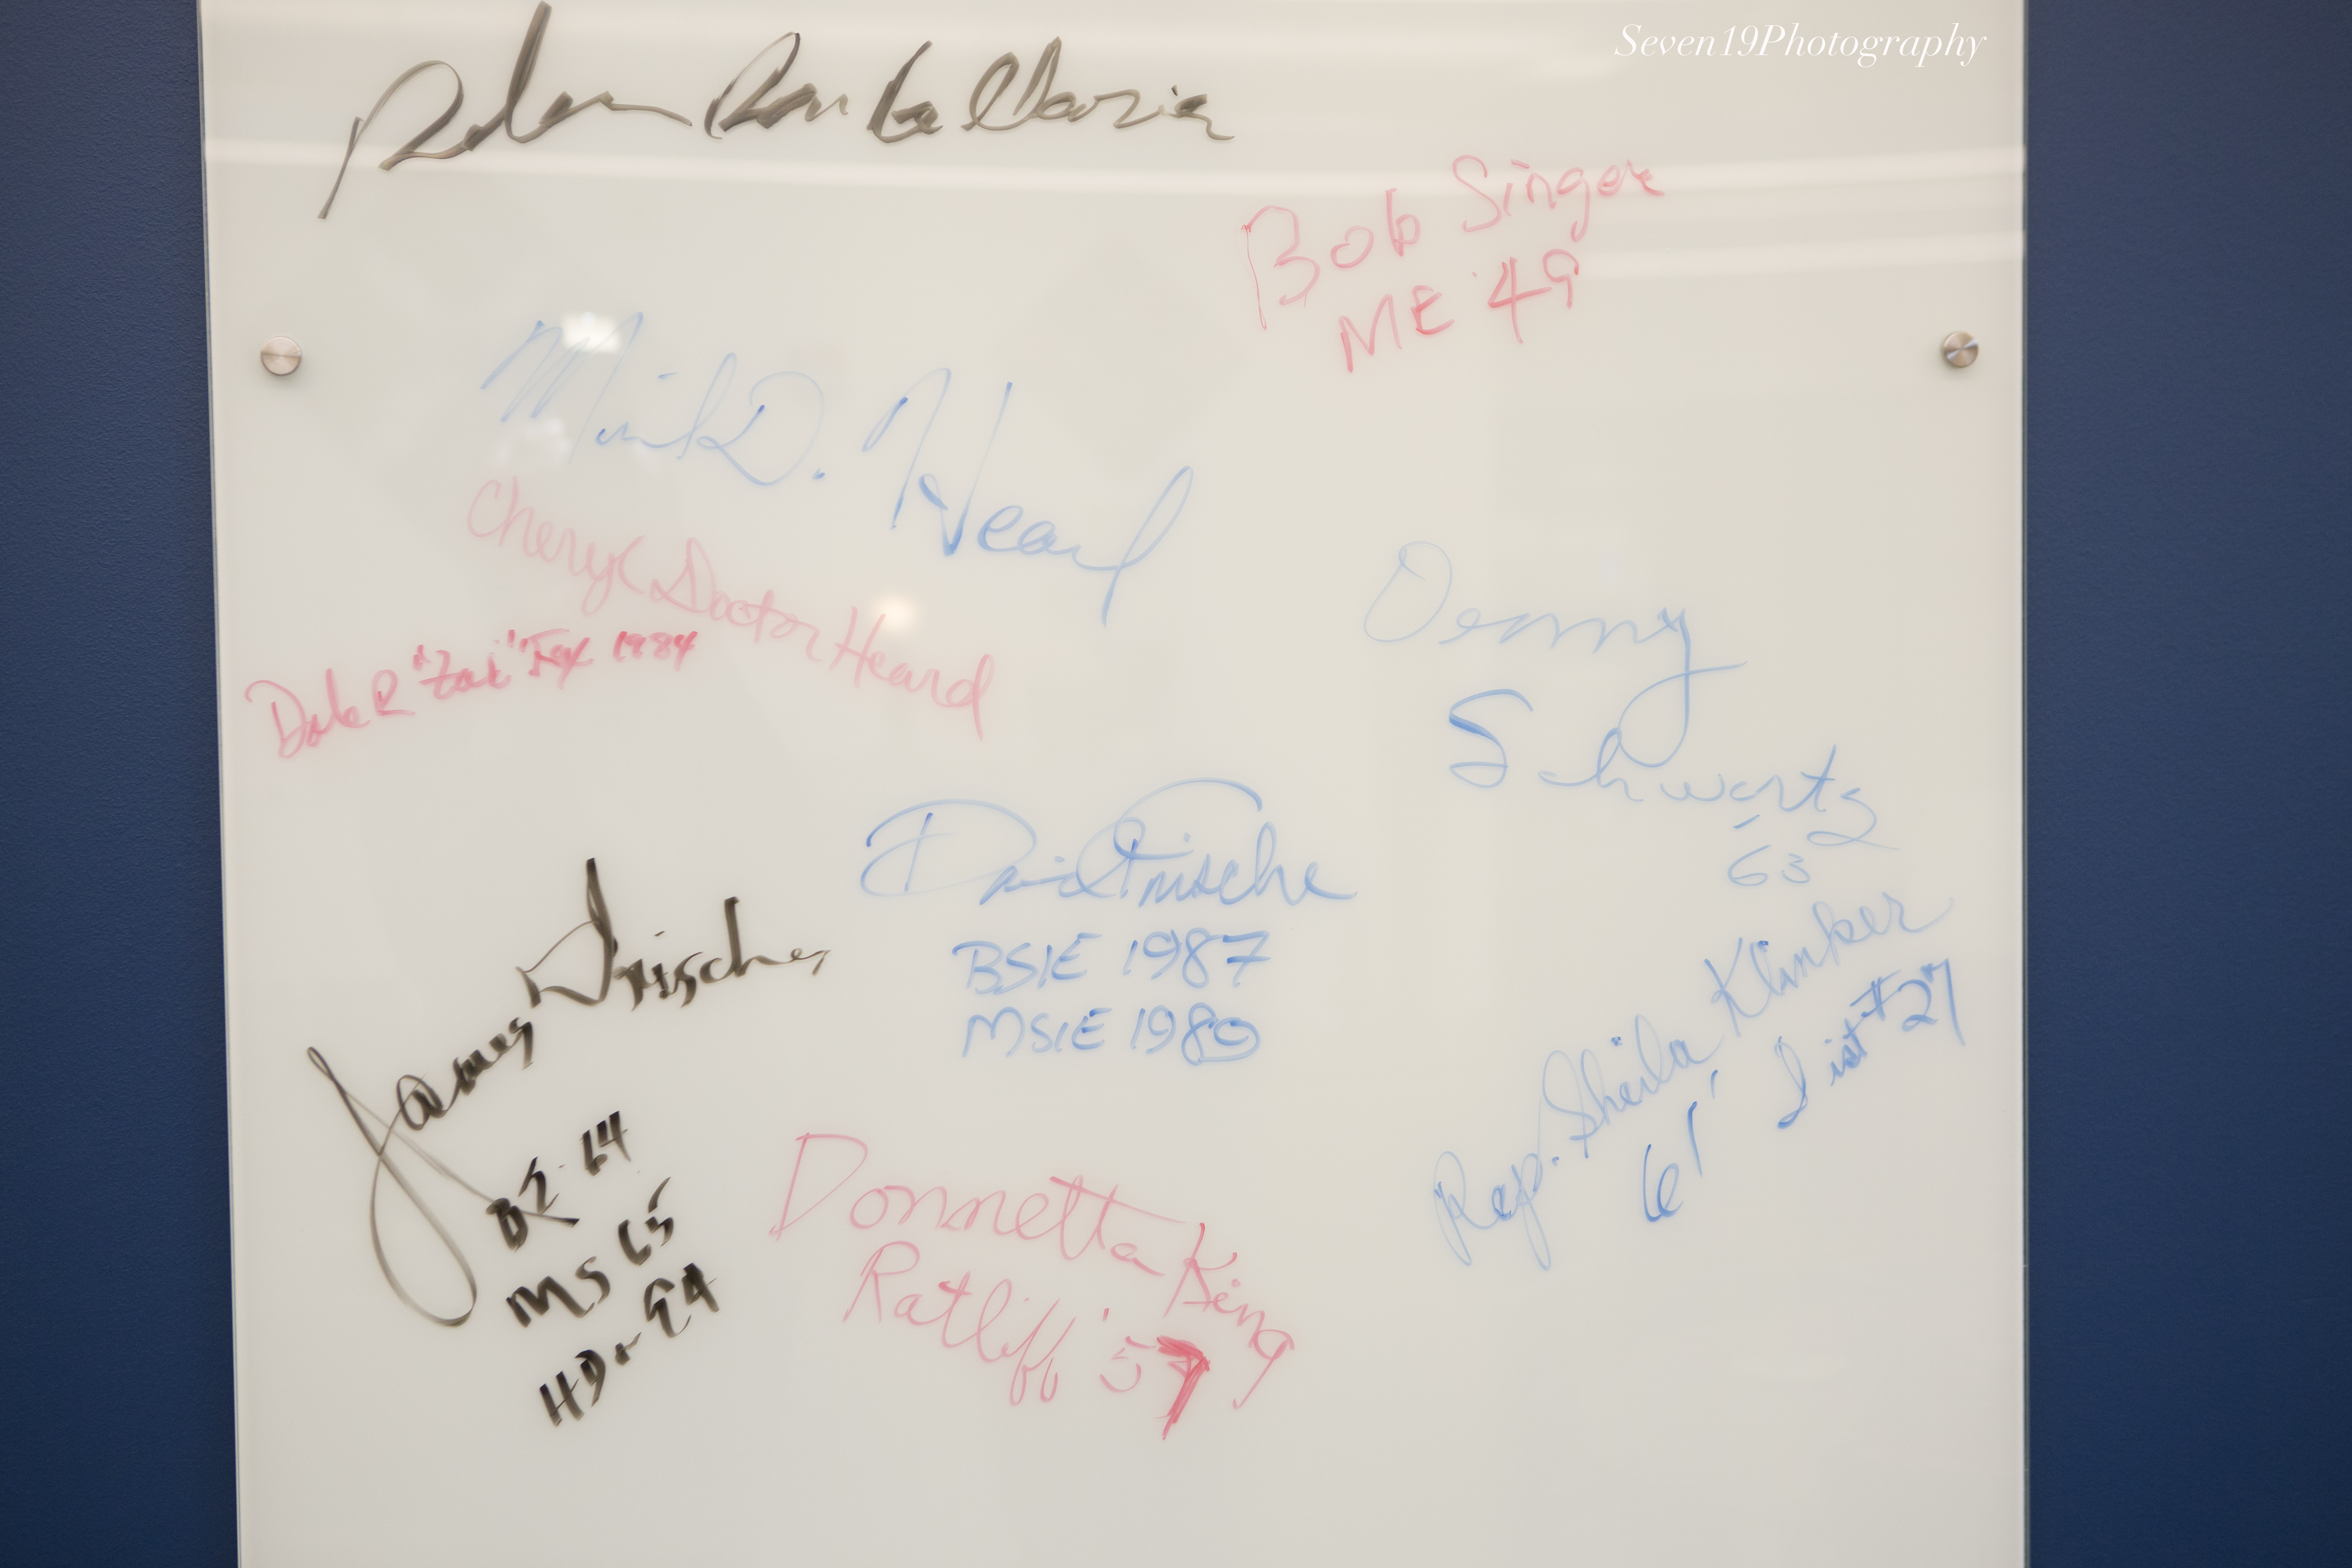 Some Alumni signed the dry erase board too <3